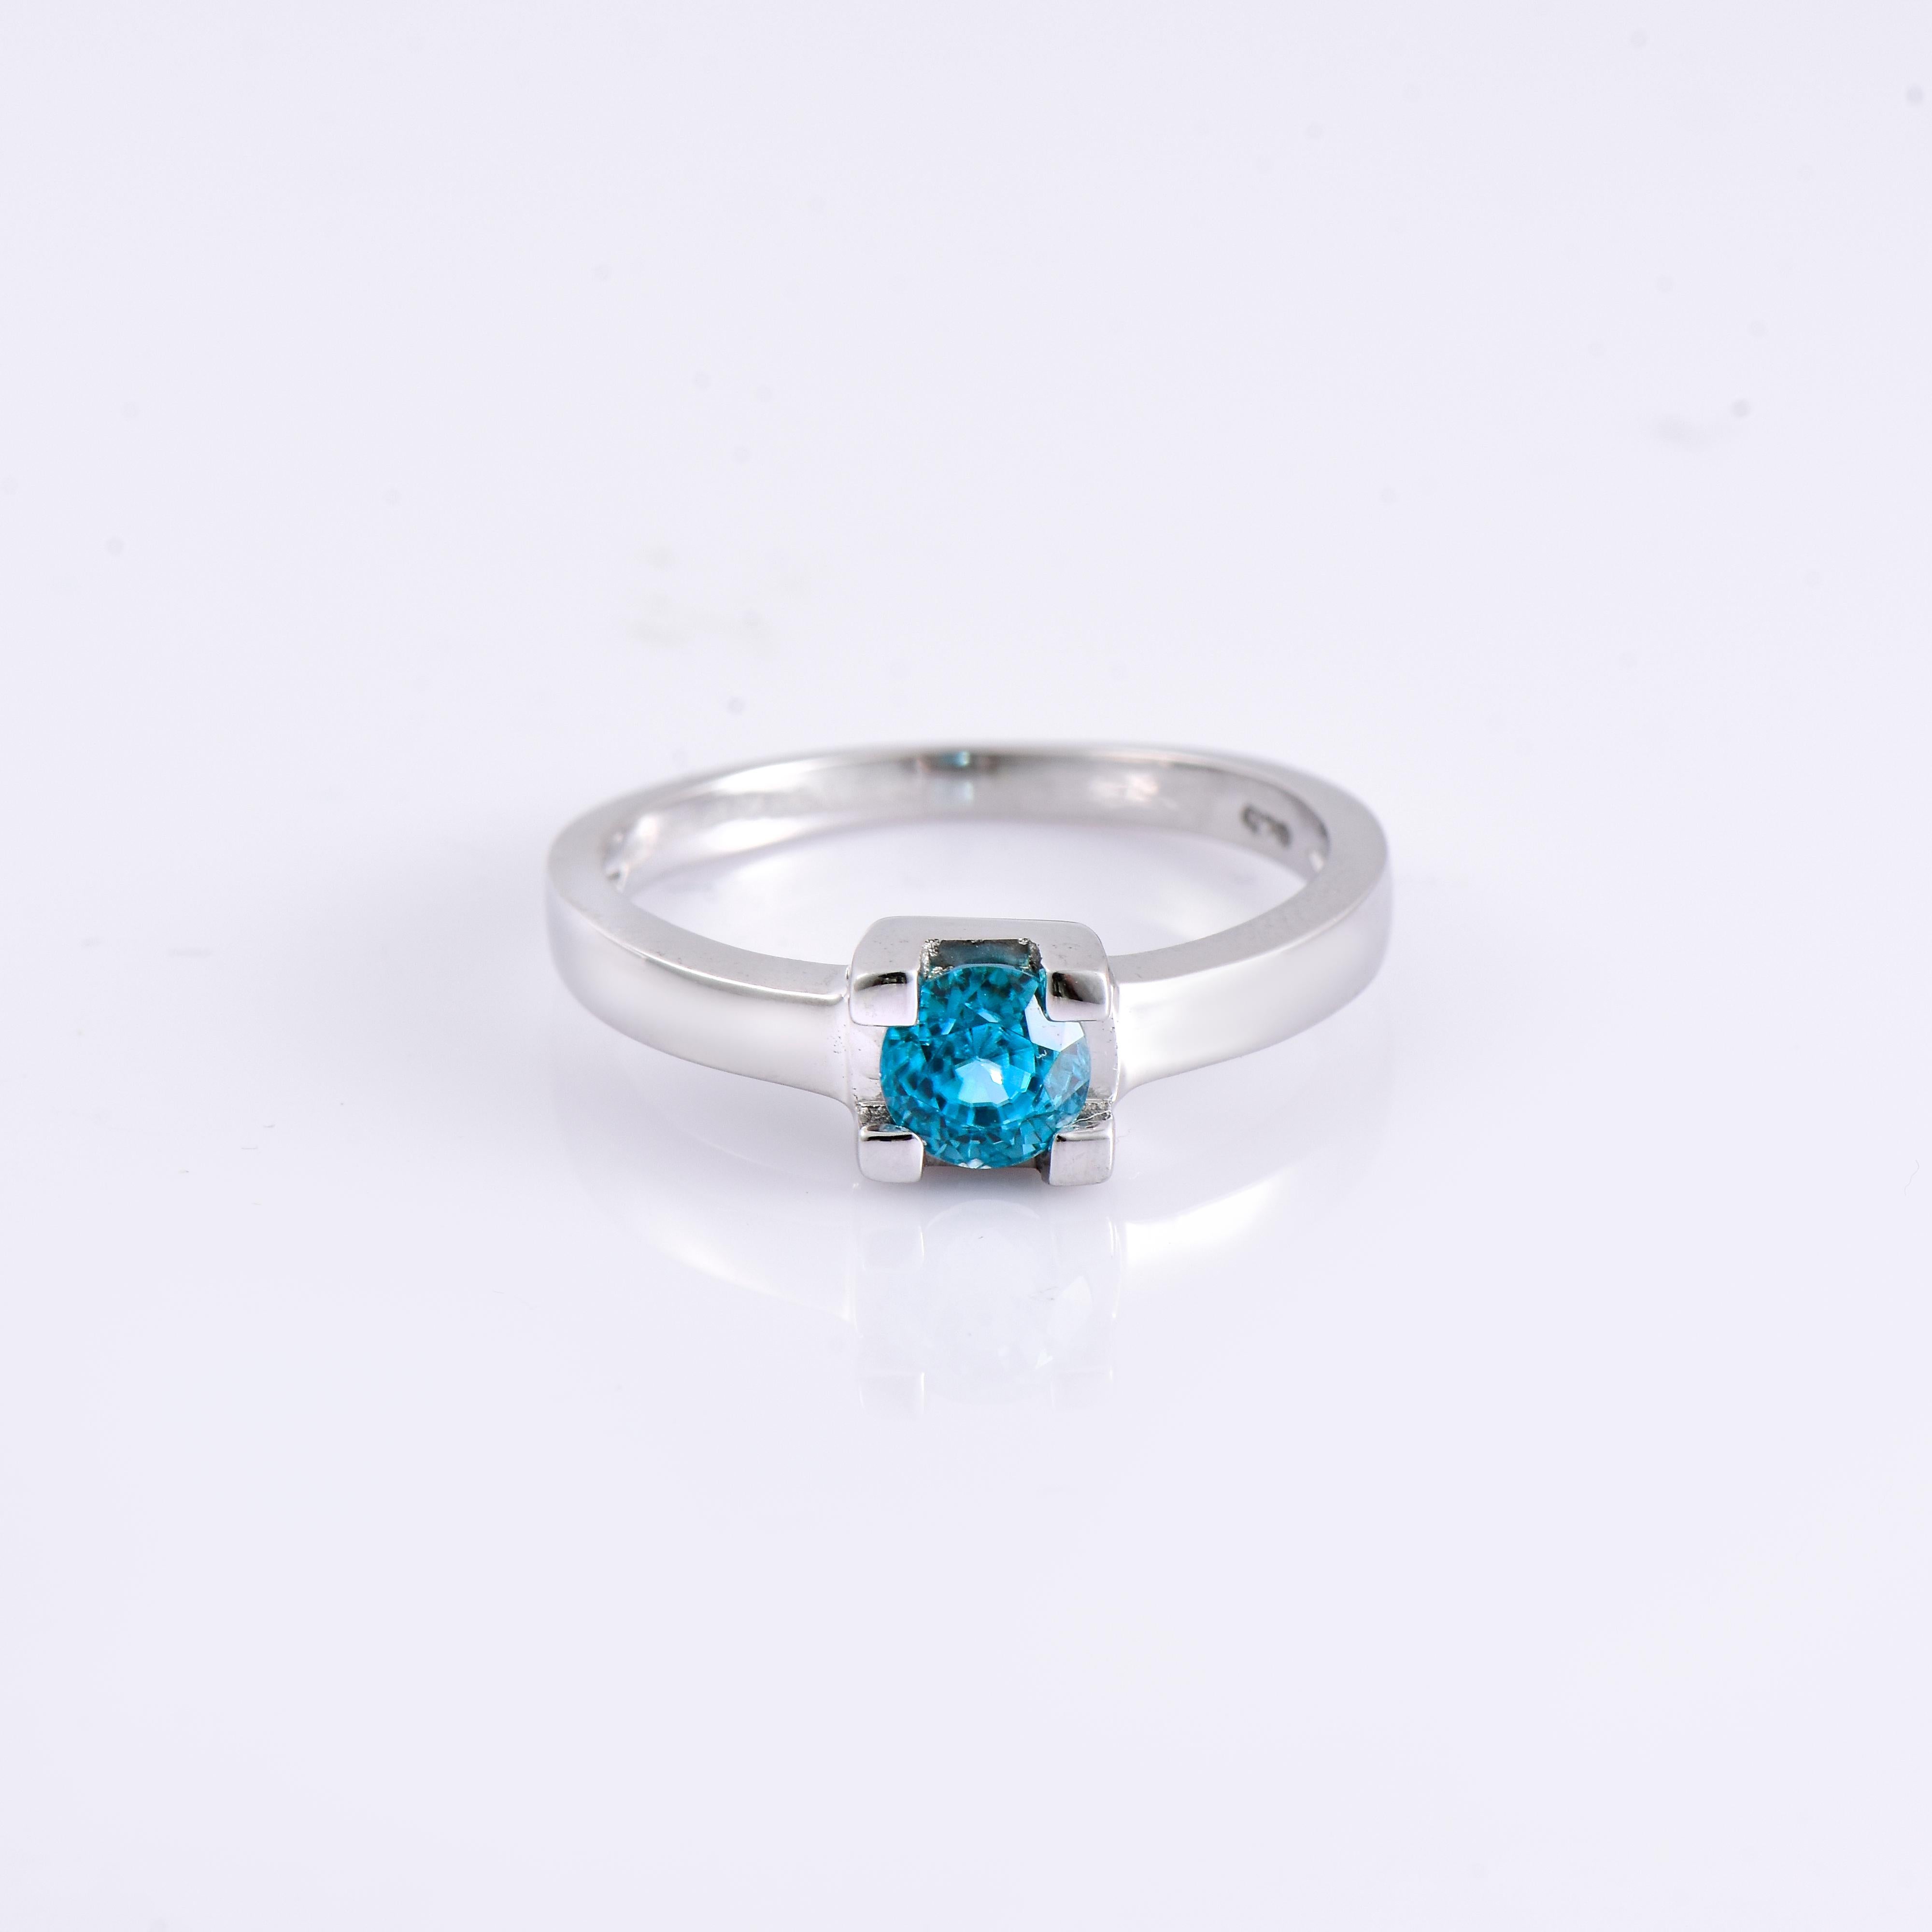 Contemporary Orloff of Denmark, 1.09 ct Natural Blue Zircon Ring in 925 Sterling Silver For Sale